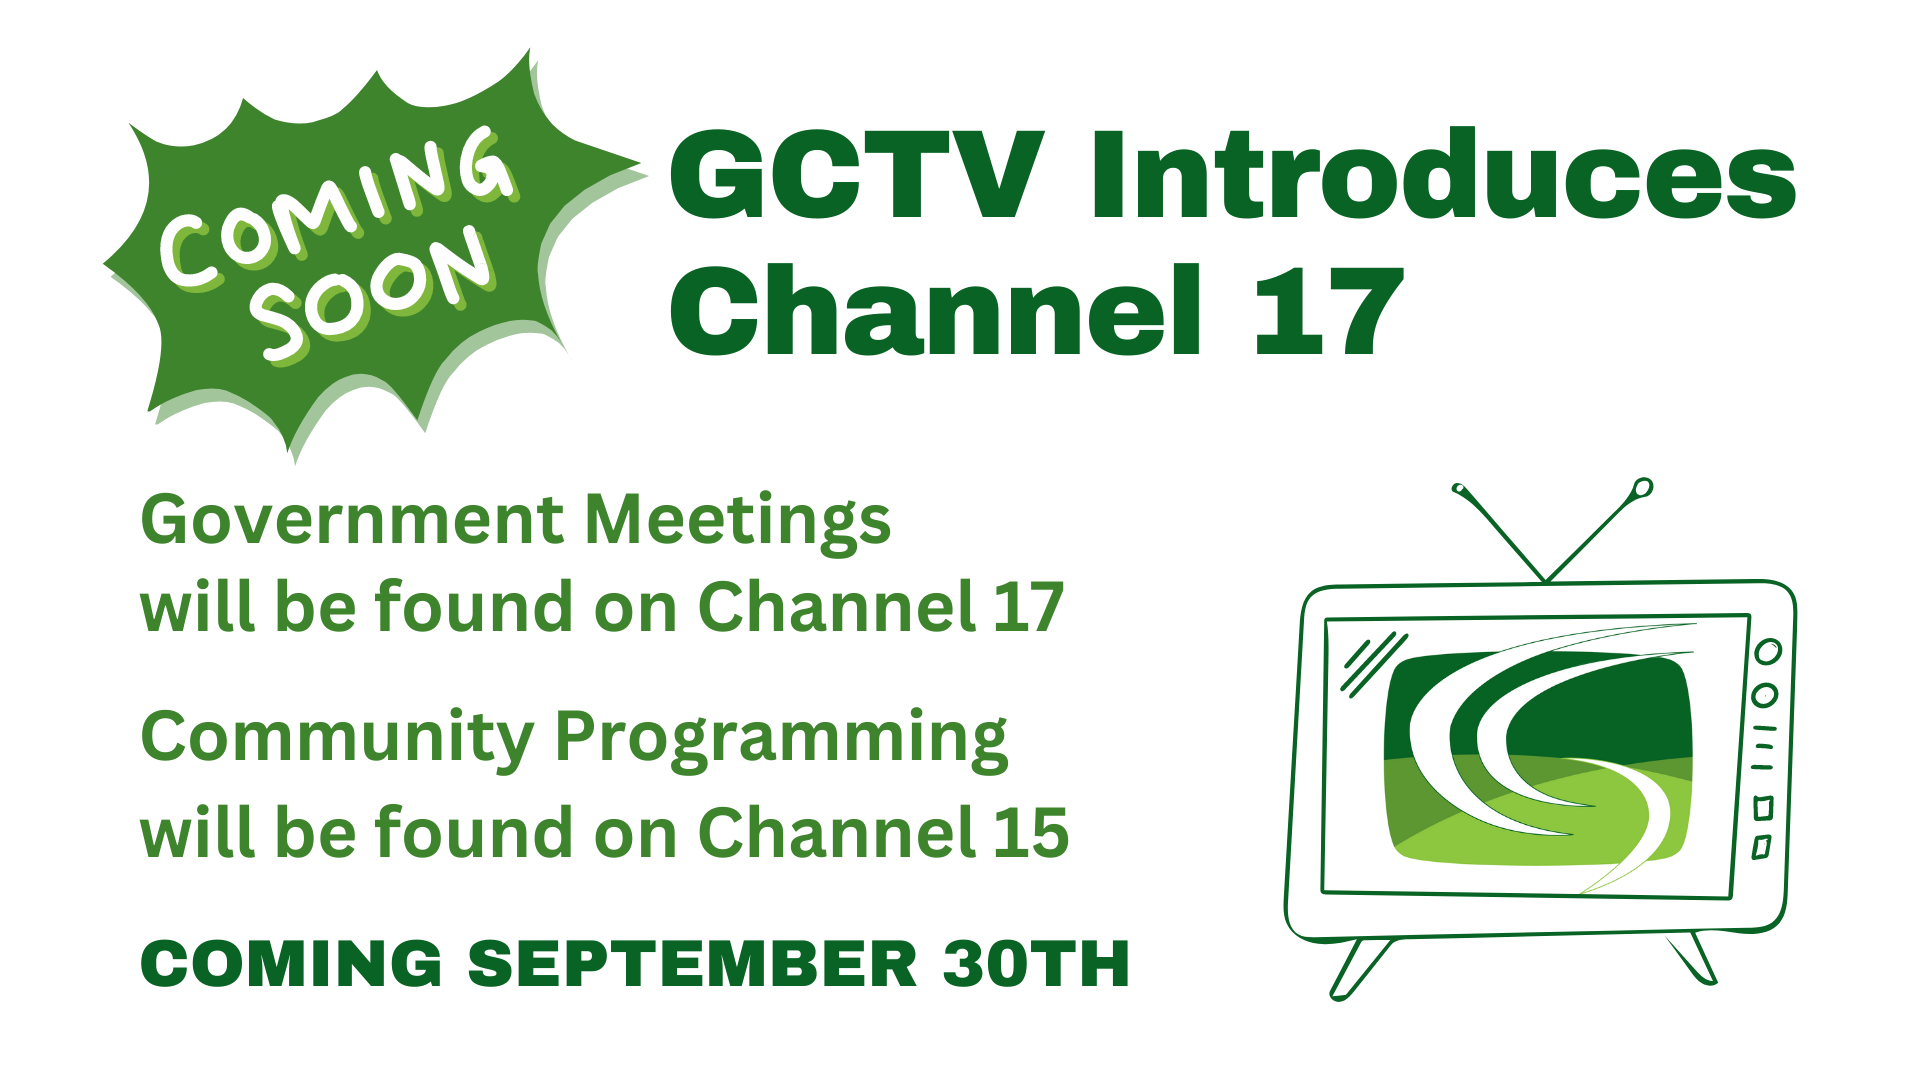 GCTV introduced channel 17: Government meetings will be found on channel 17. Community Programming will be found on channel 15. Coming September 30th.